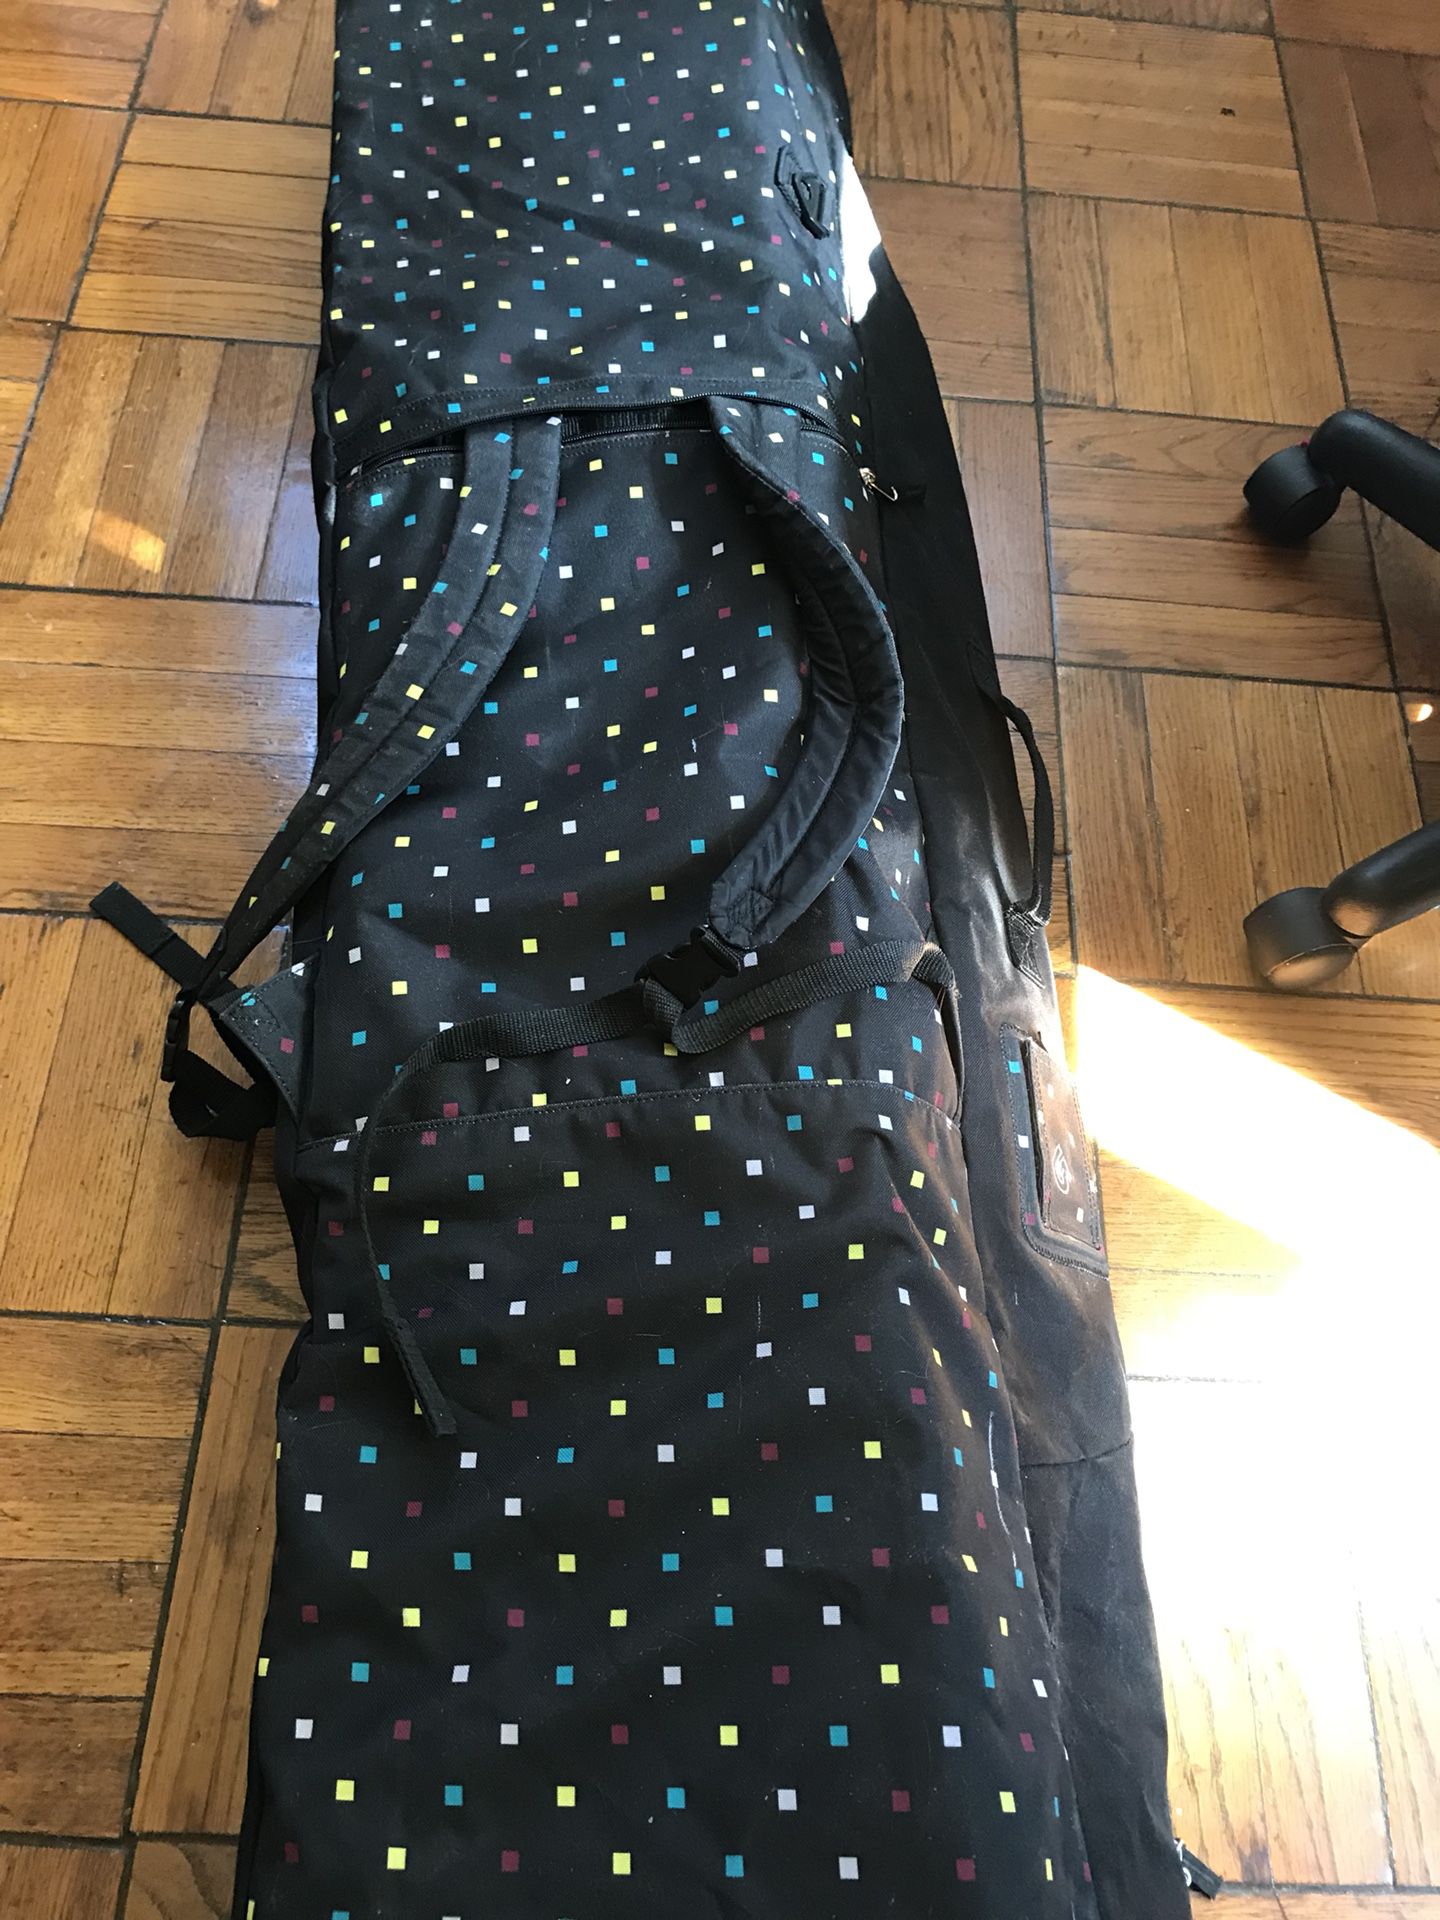 Burton snowboard bag with backpack straps